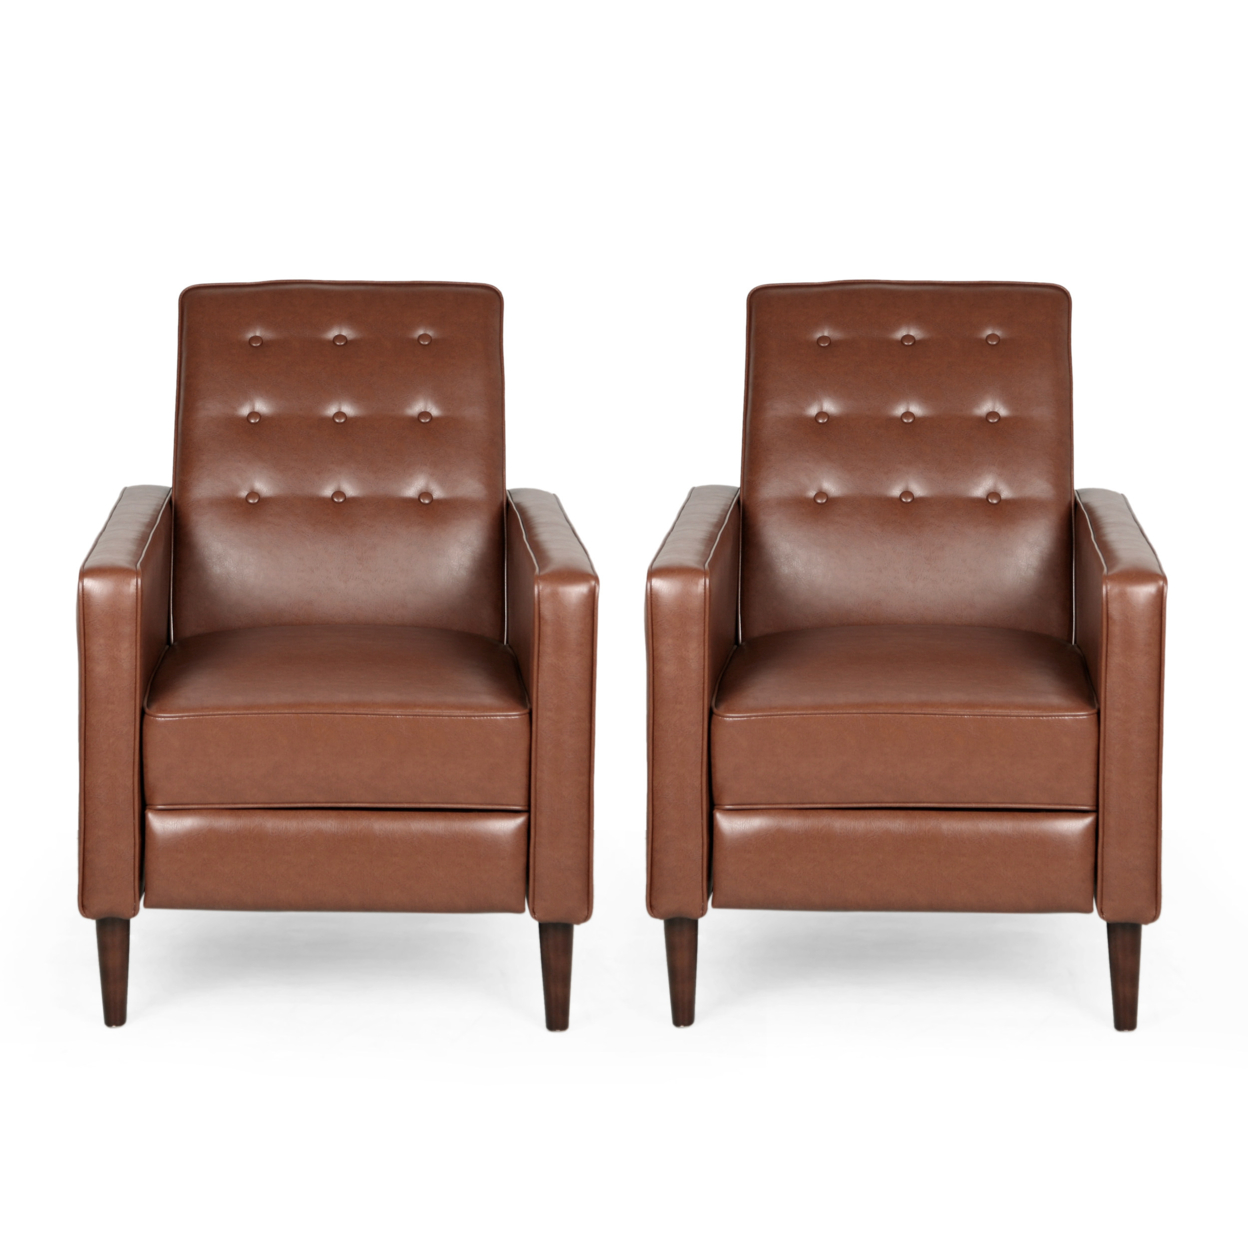 Mason Mid-Century Modern Button Tufted Recliners (Set Of 2)